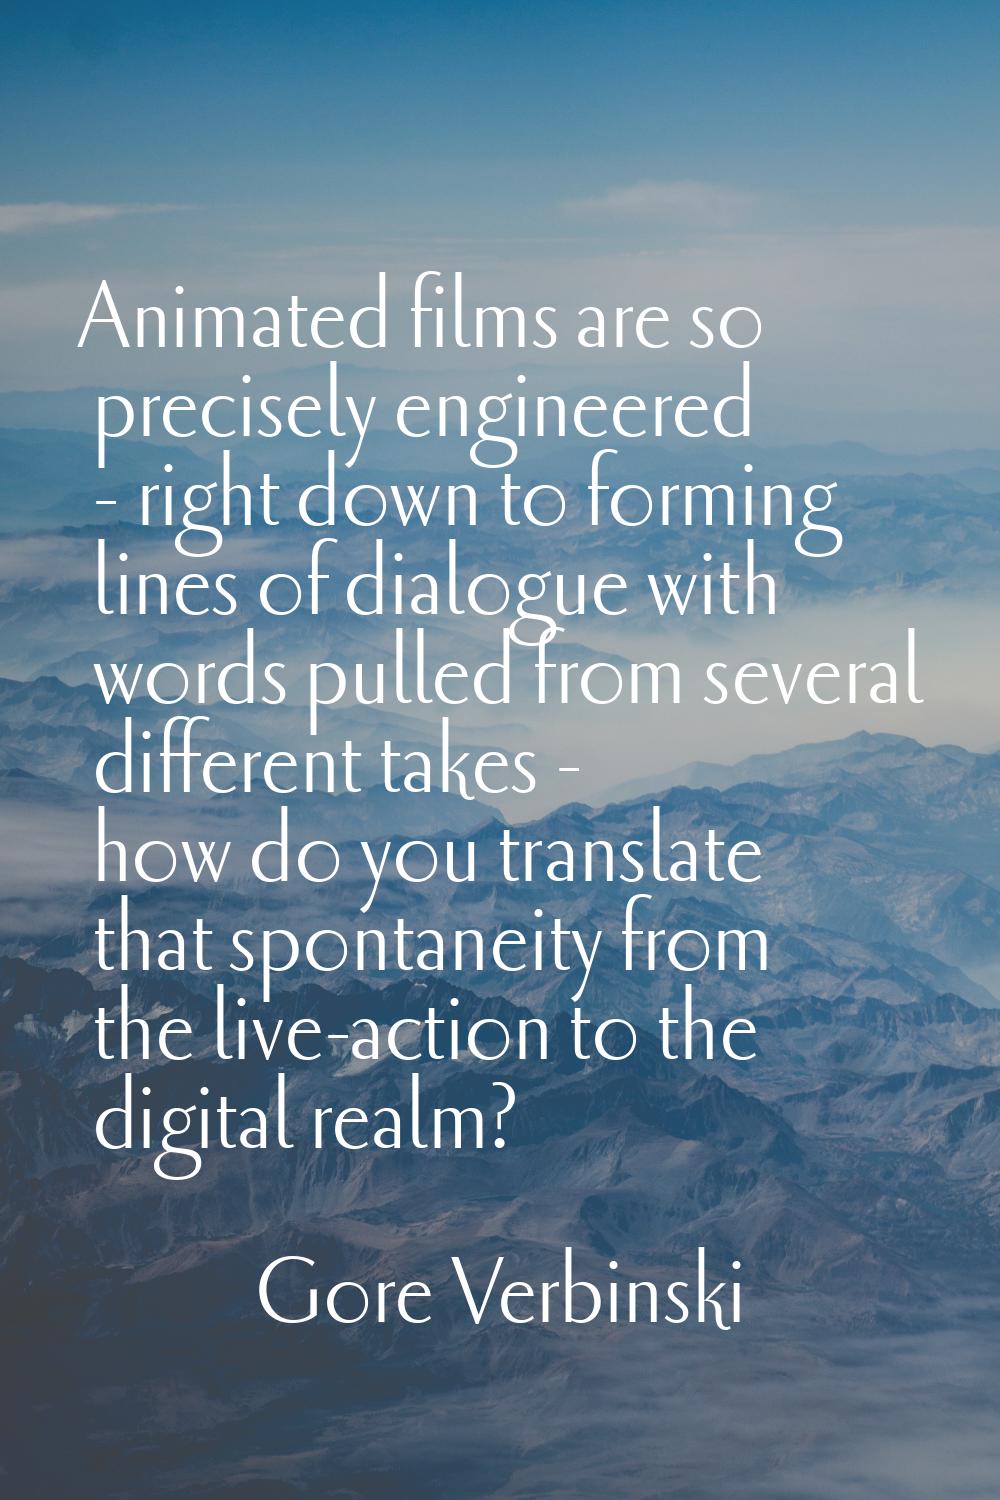 Animated films are so precisely engineered - right down to forming lines of dialogue with words pul